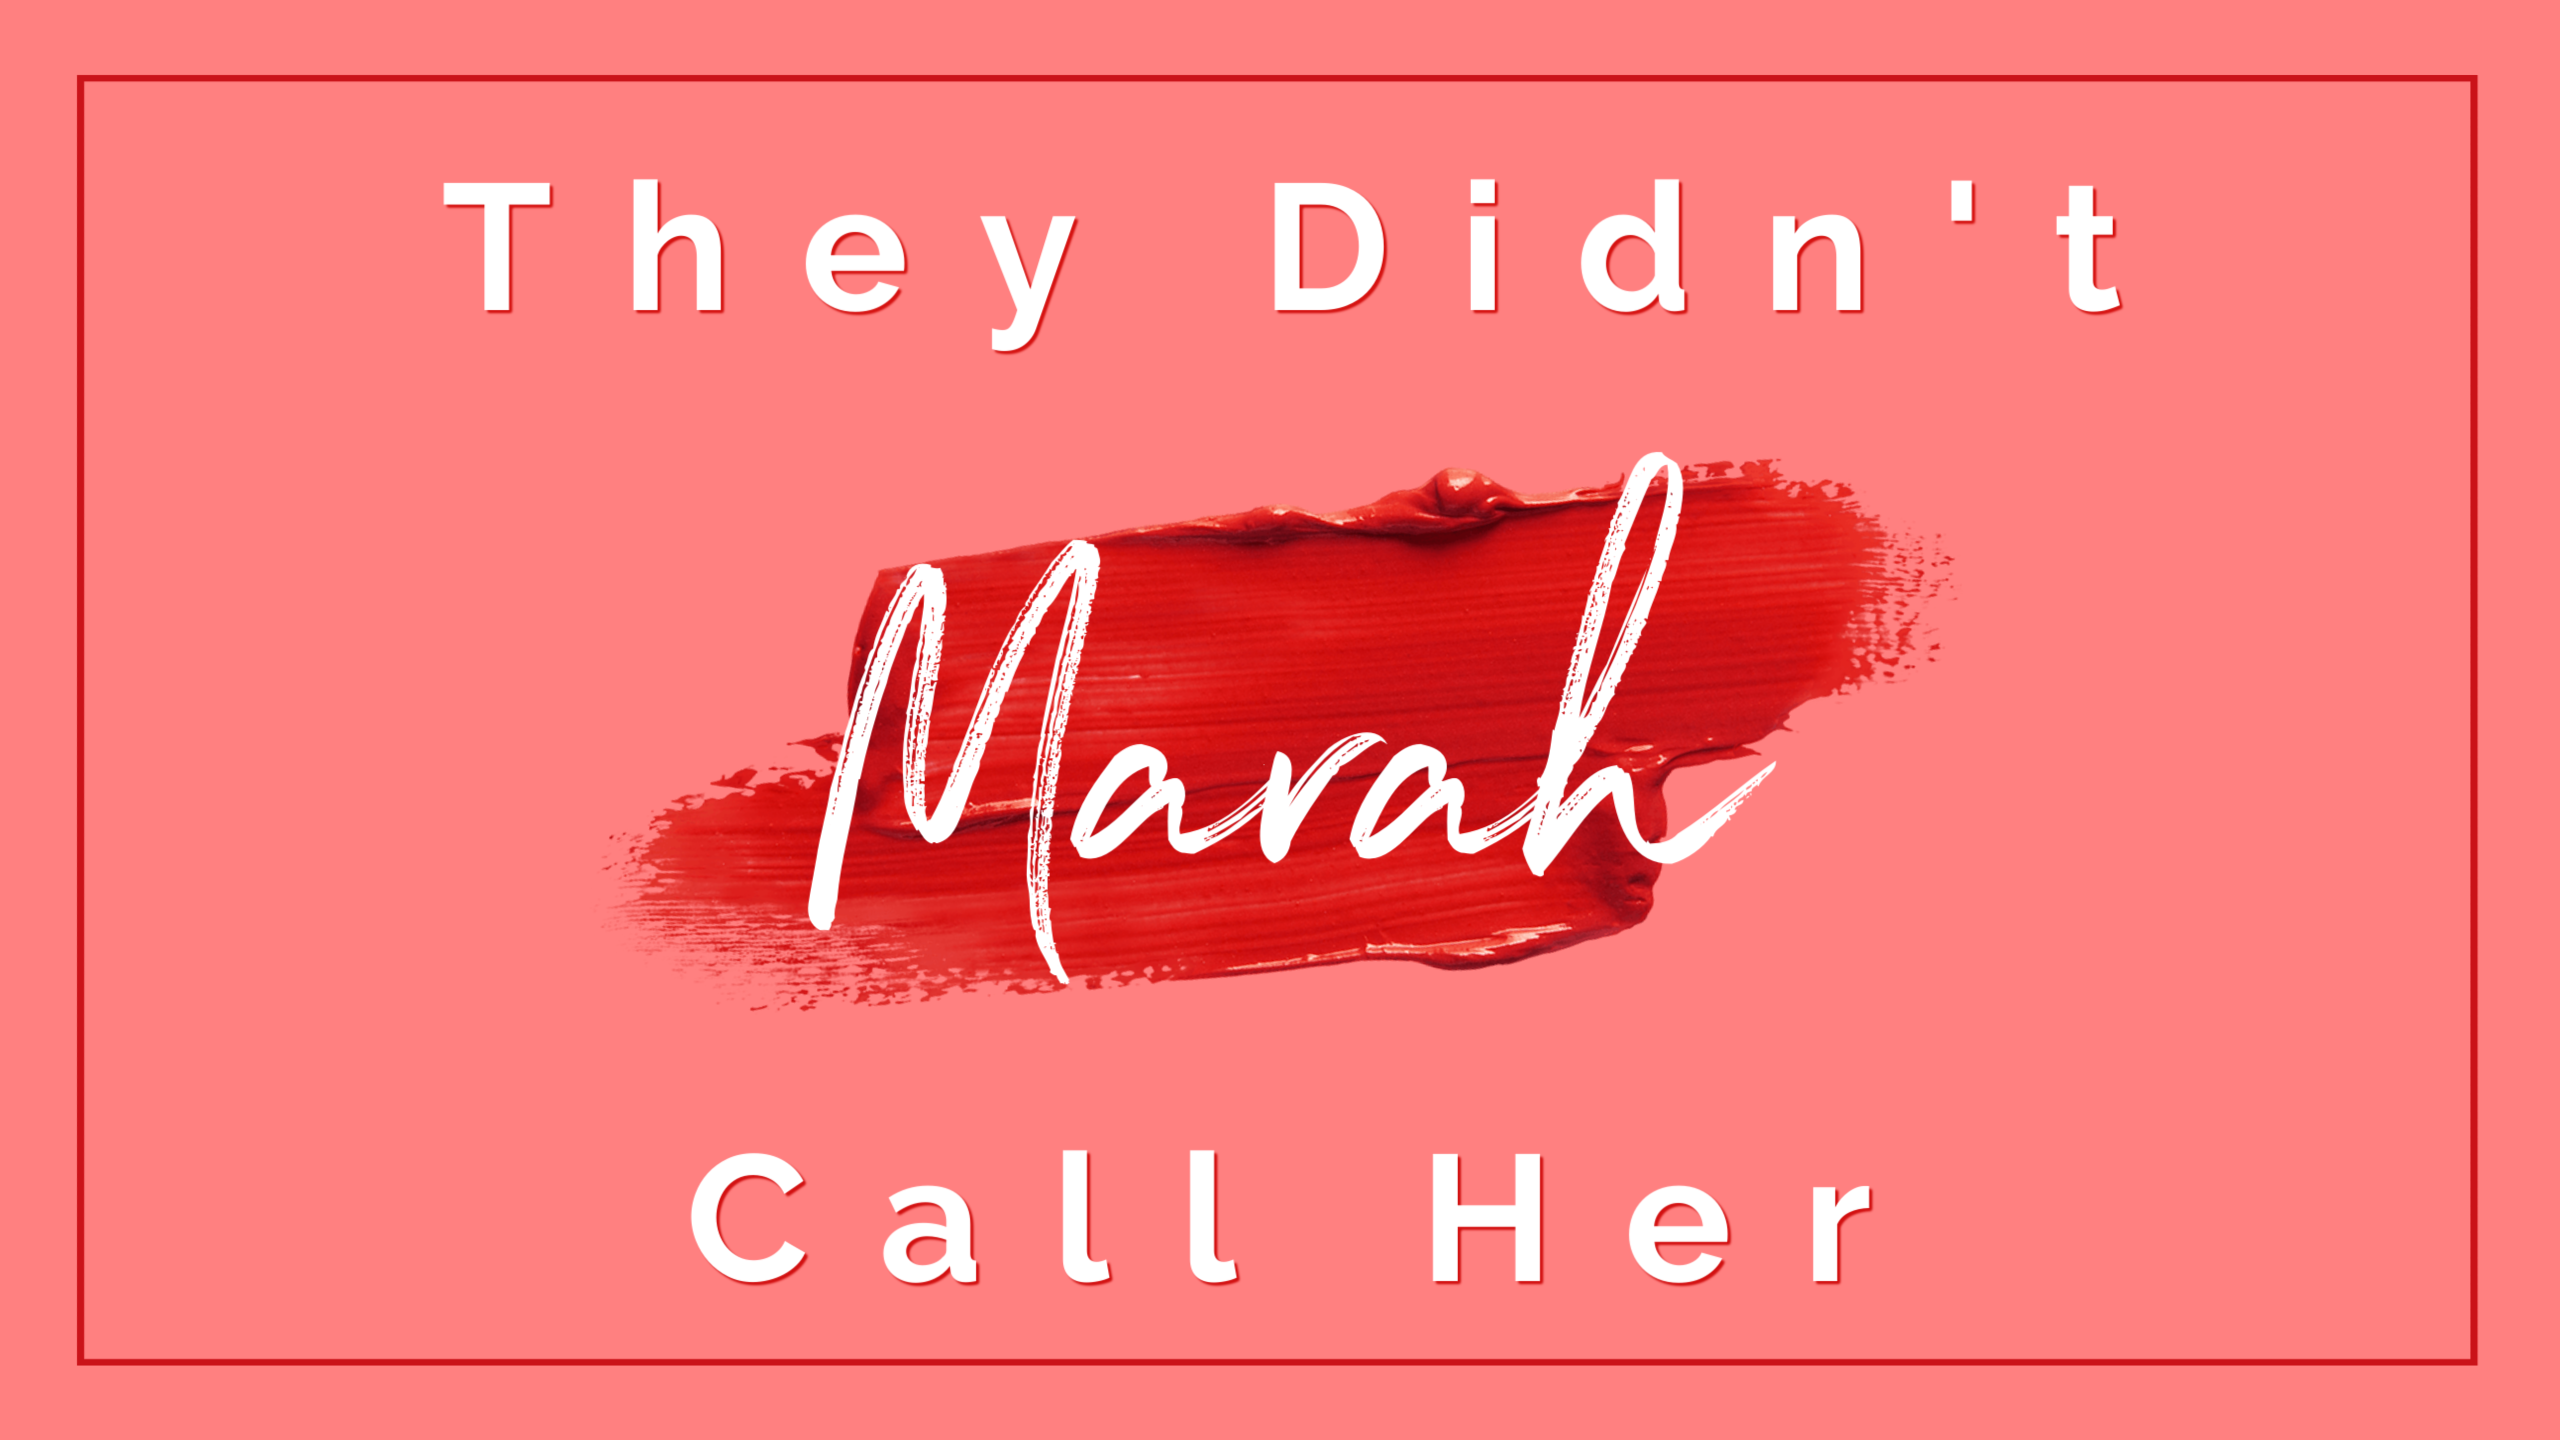 They Didn't Call Her Marah